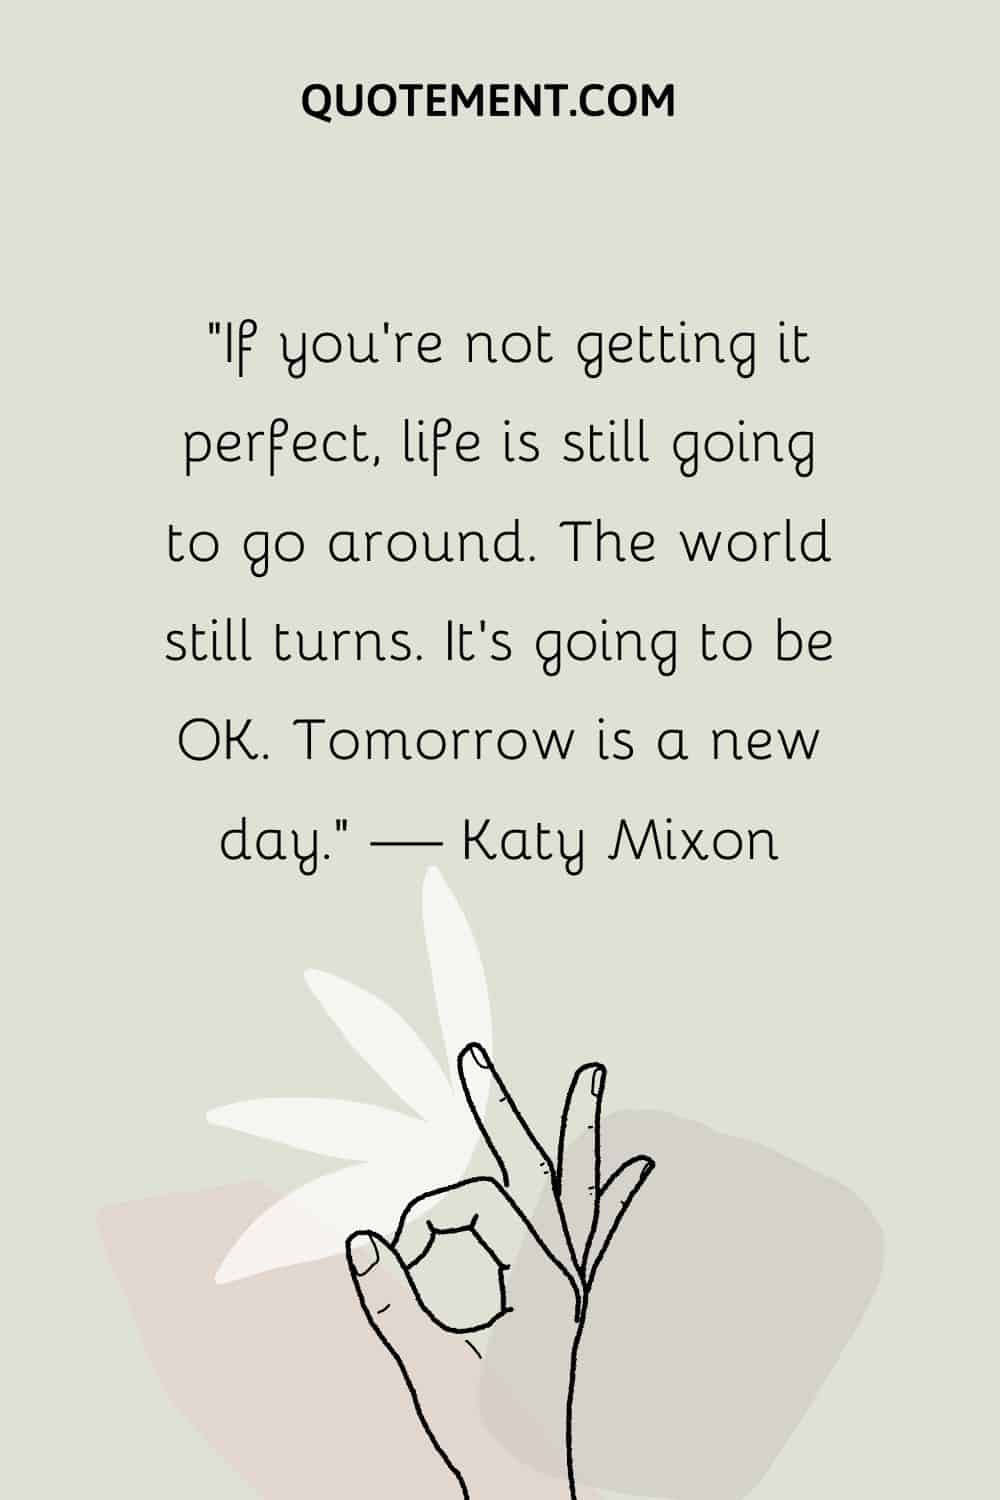 “If you’re not getting it perfect, life is still going to go around. The world still turns. It’s going to be OK. Tomorrow is a new day.” — Katy Mixon